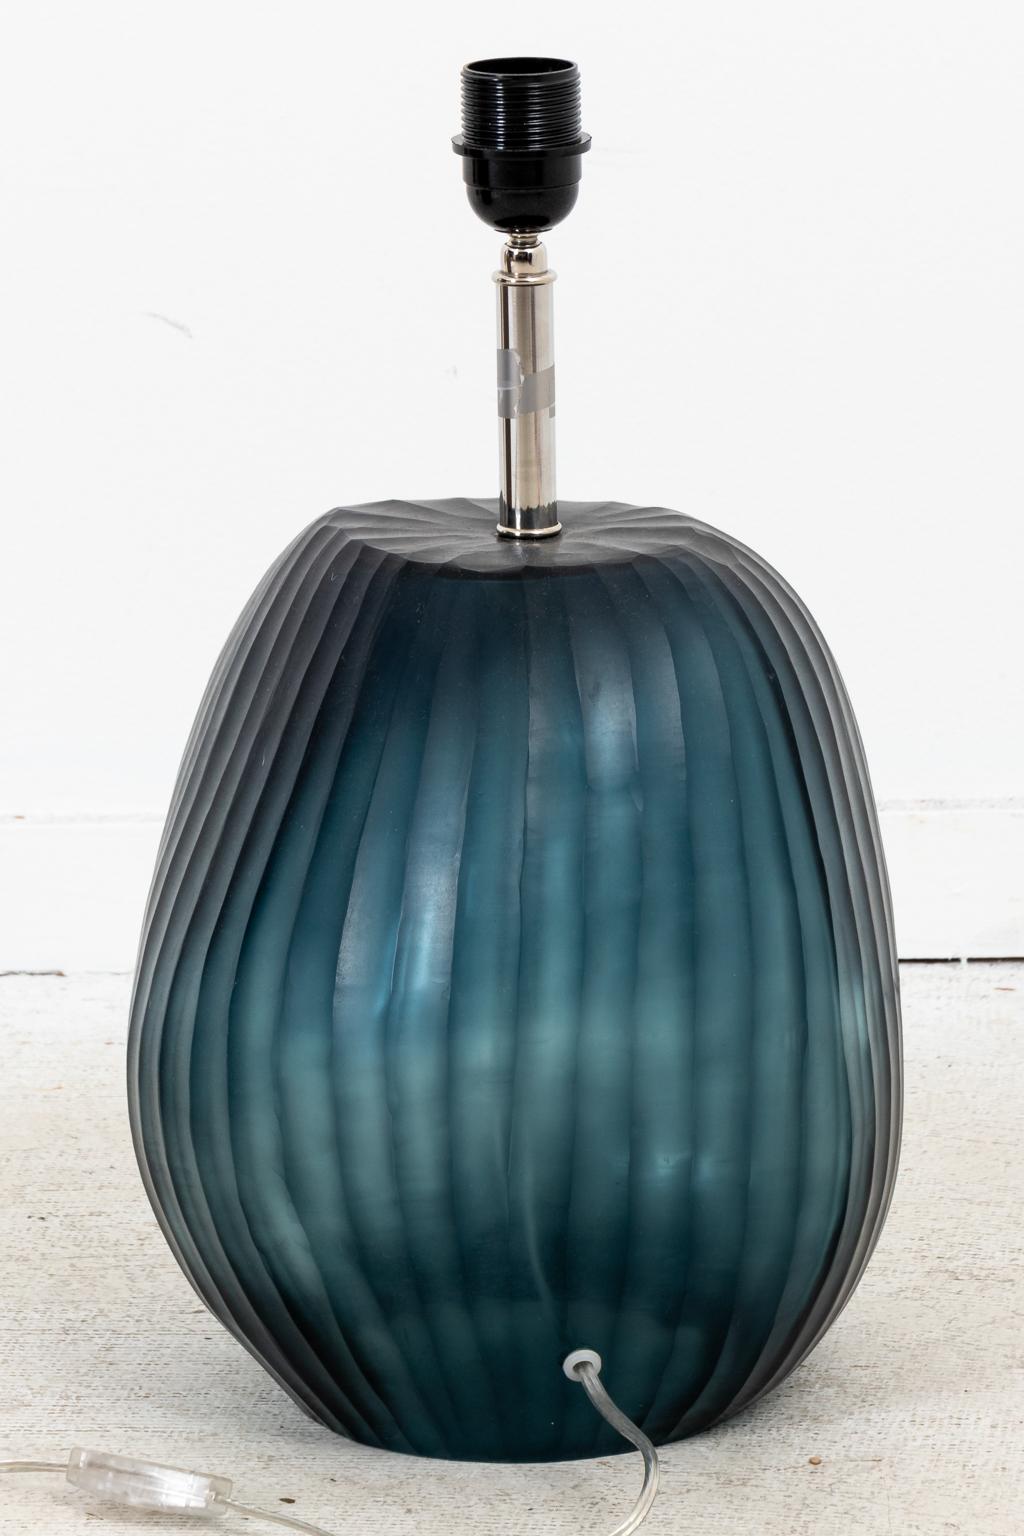 Contemporary hand blown Ocean blue glass table lamp with sanded surface in irregular striated pattern with grey fabric shade. The body measures 10.00 inches diameter by 12.00 inches height. The overall height of the piece is 27.25 inches. Shades not